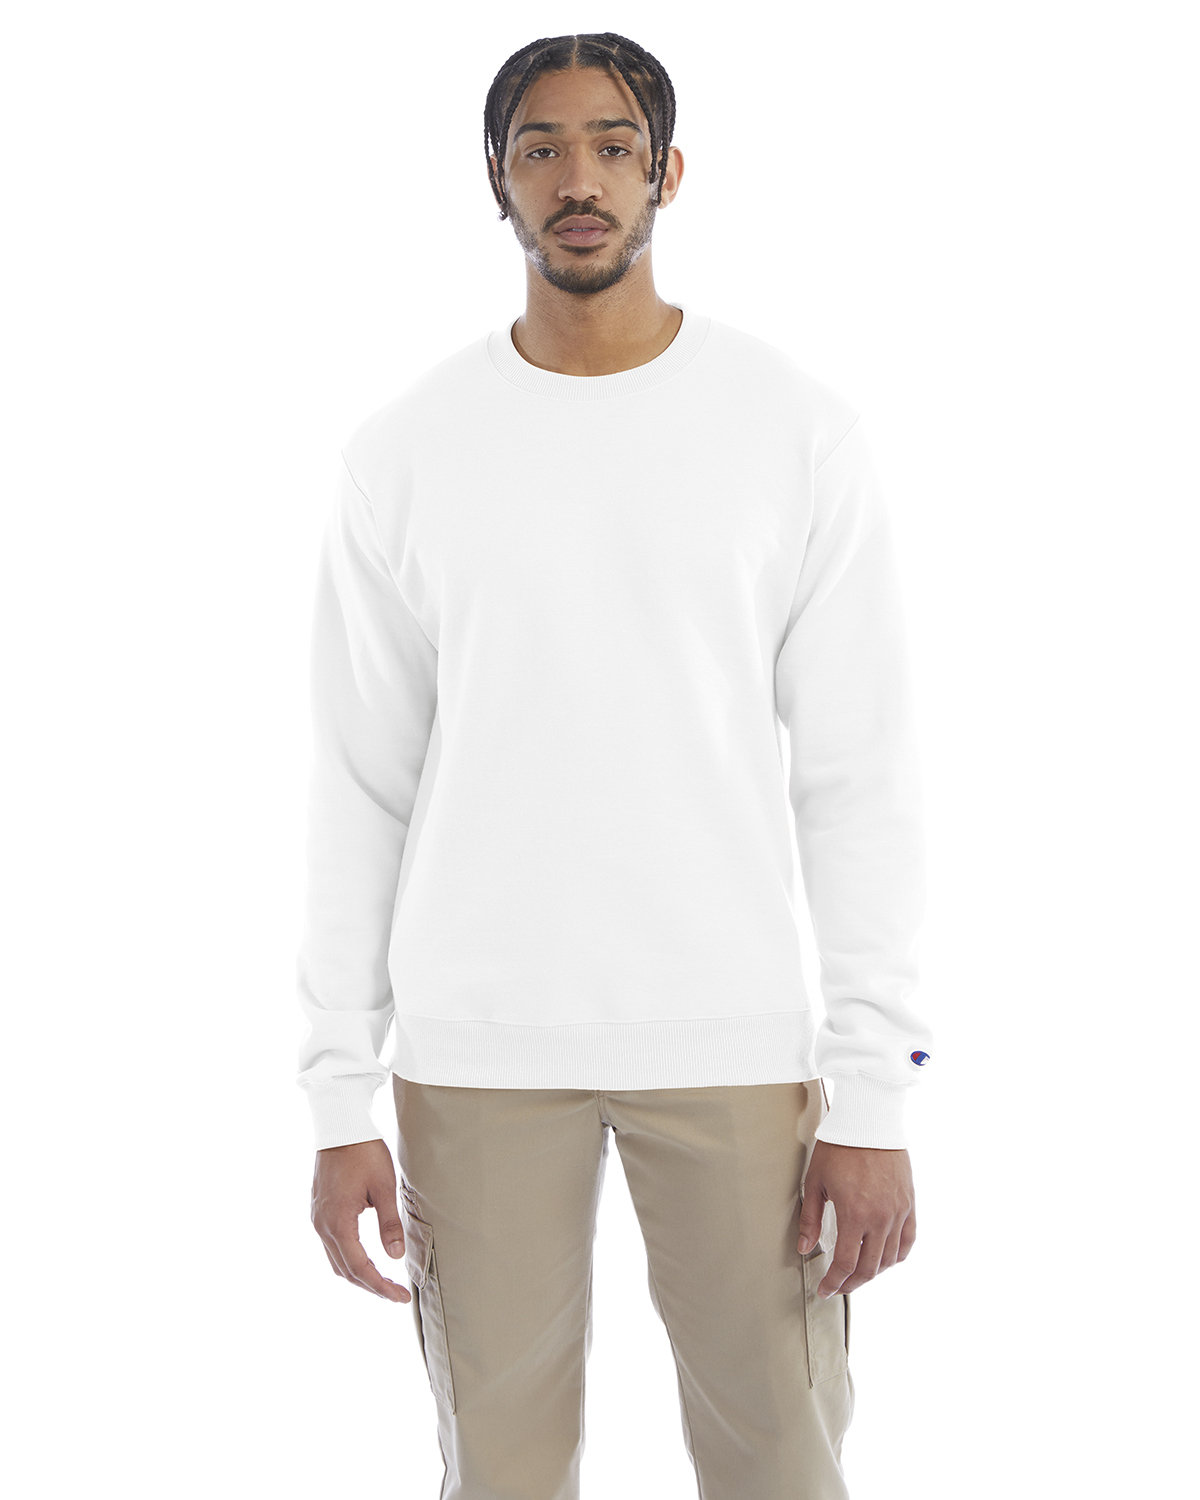 White Adult Polyester Crew Neck T-Shirt by Make Market®